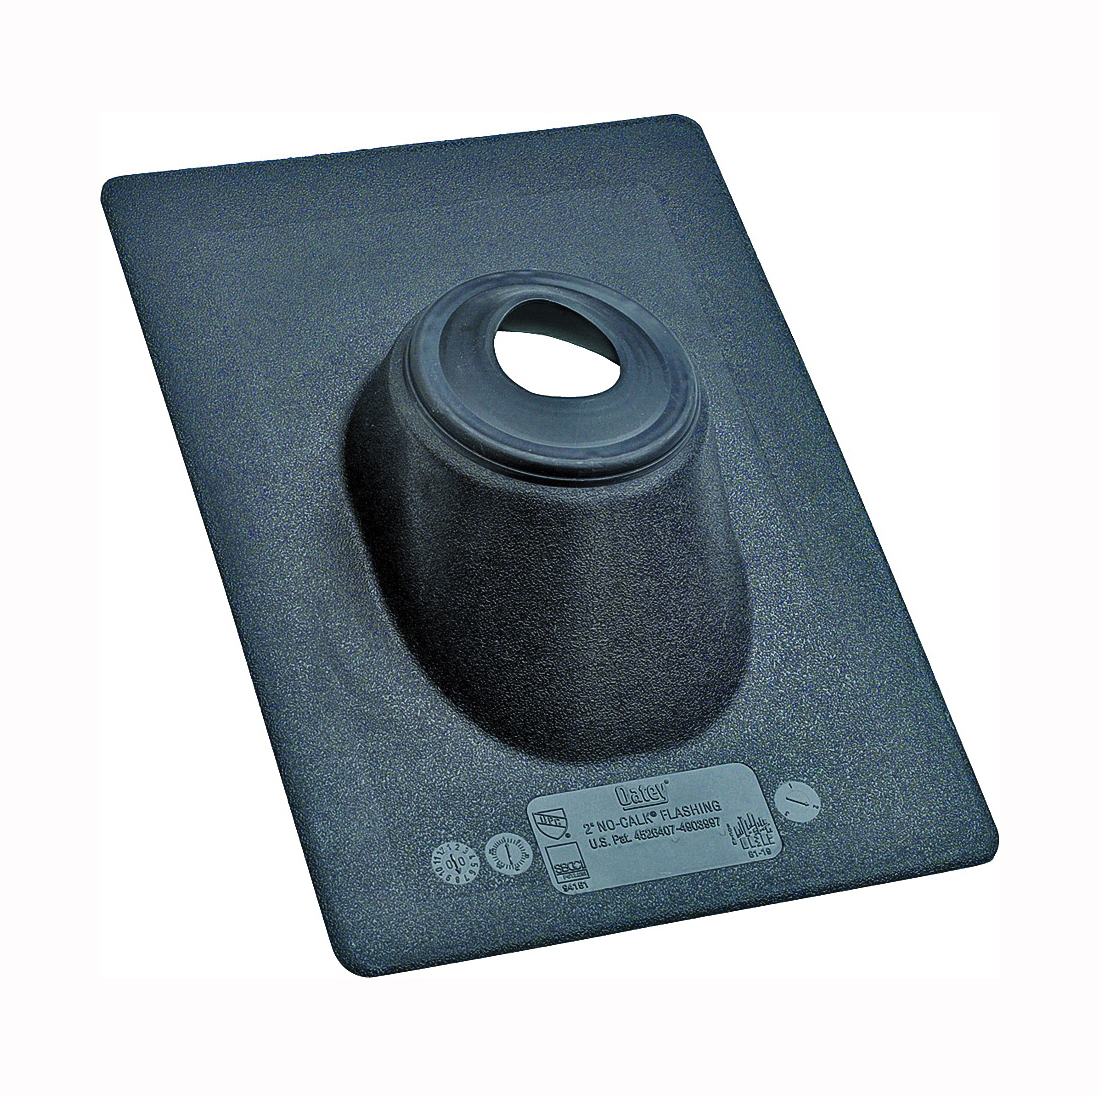 No-Calk Series 11889 Roof Flashing, 18 in OAL, 18 in OAW, Thermoplastic